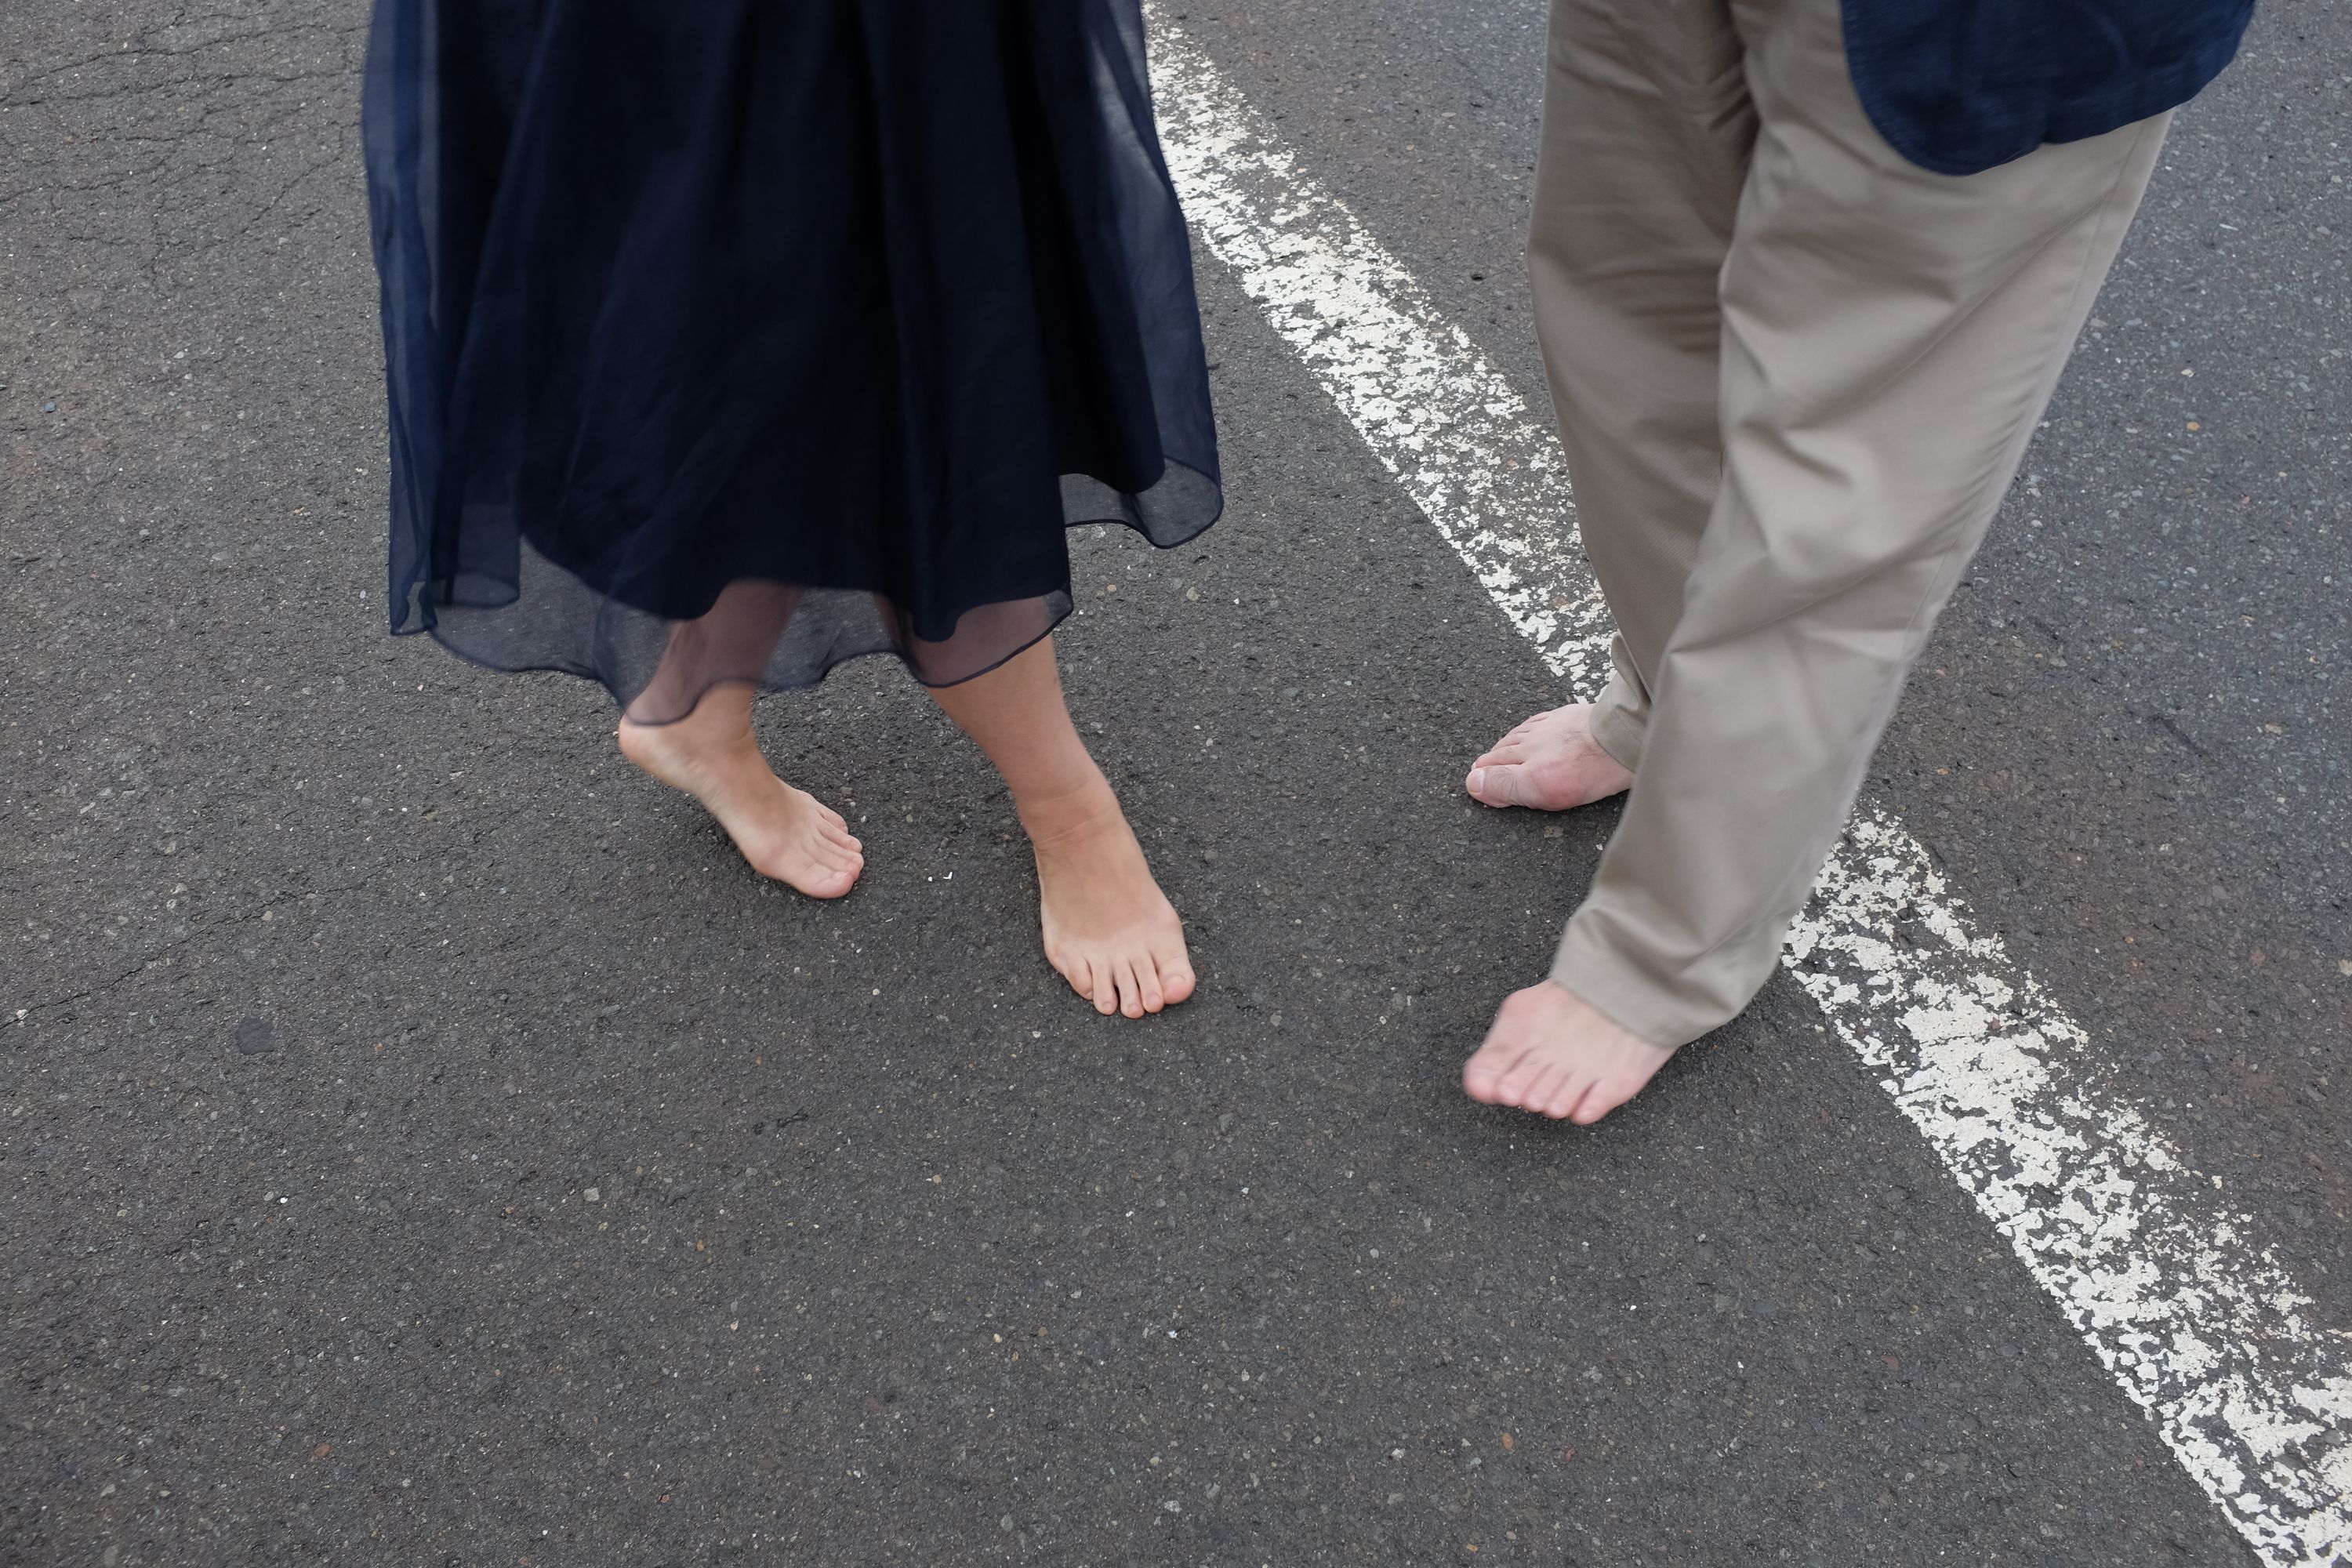 A barefoot couple stand on the asphalt, visible from the waist down.